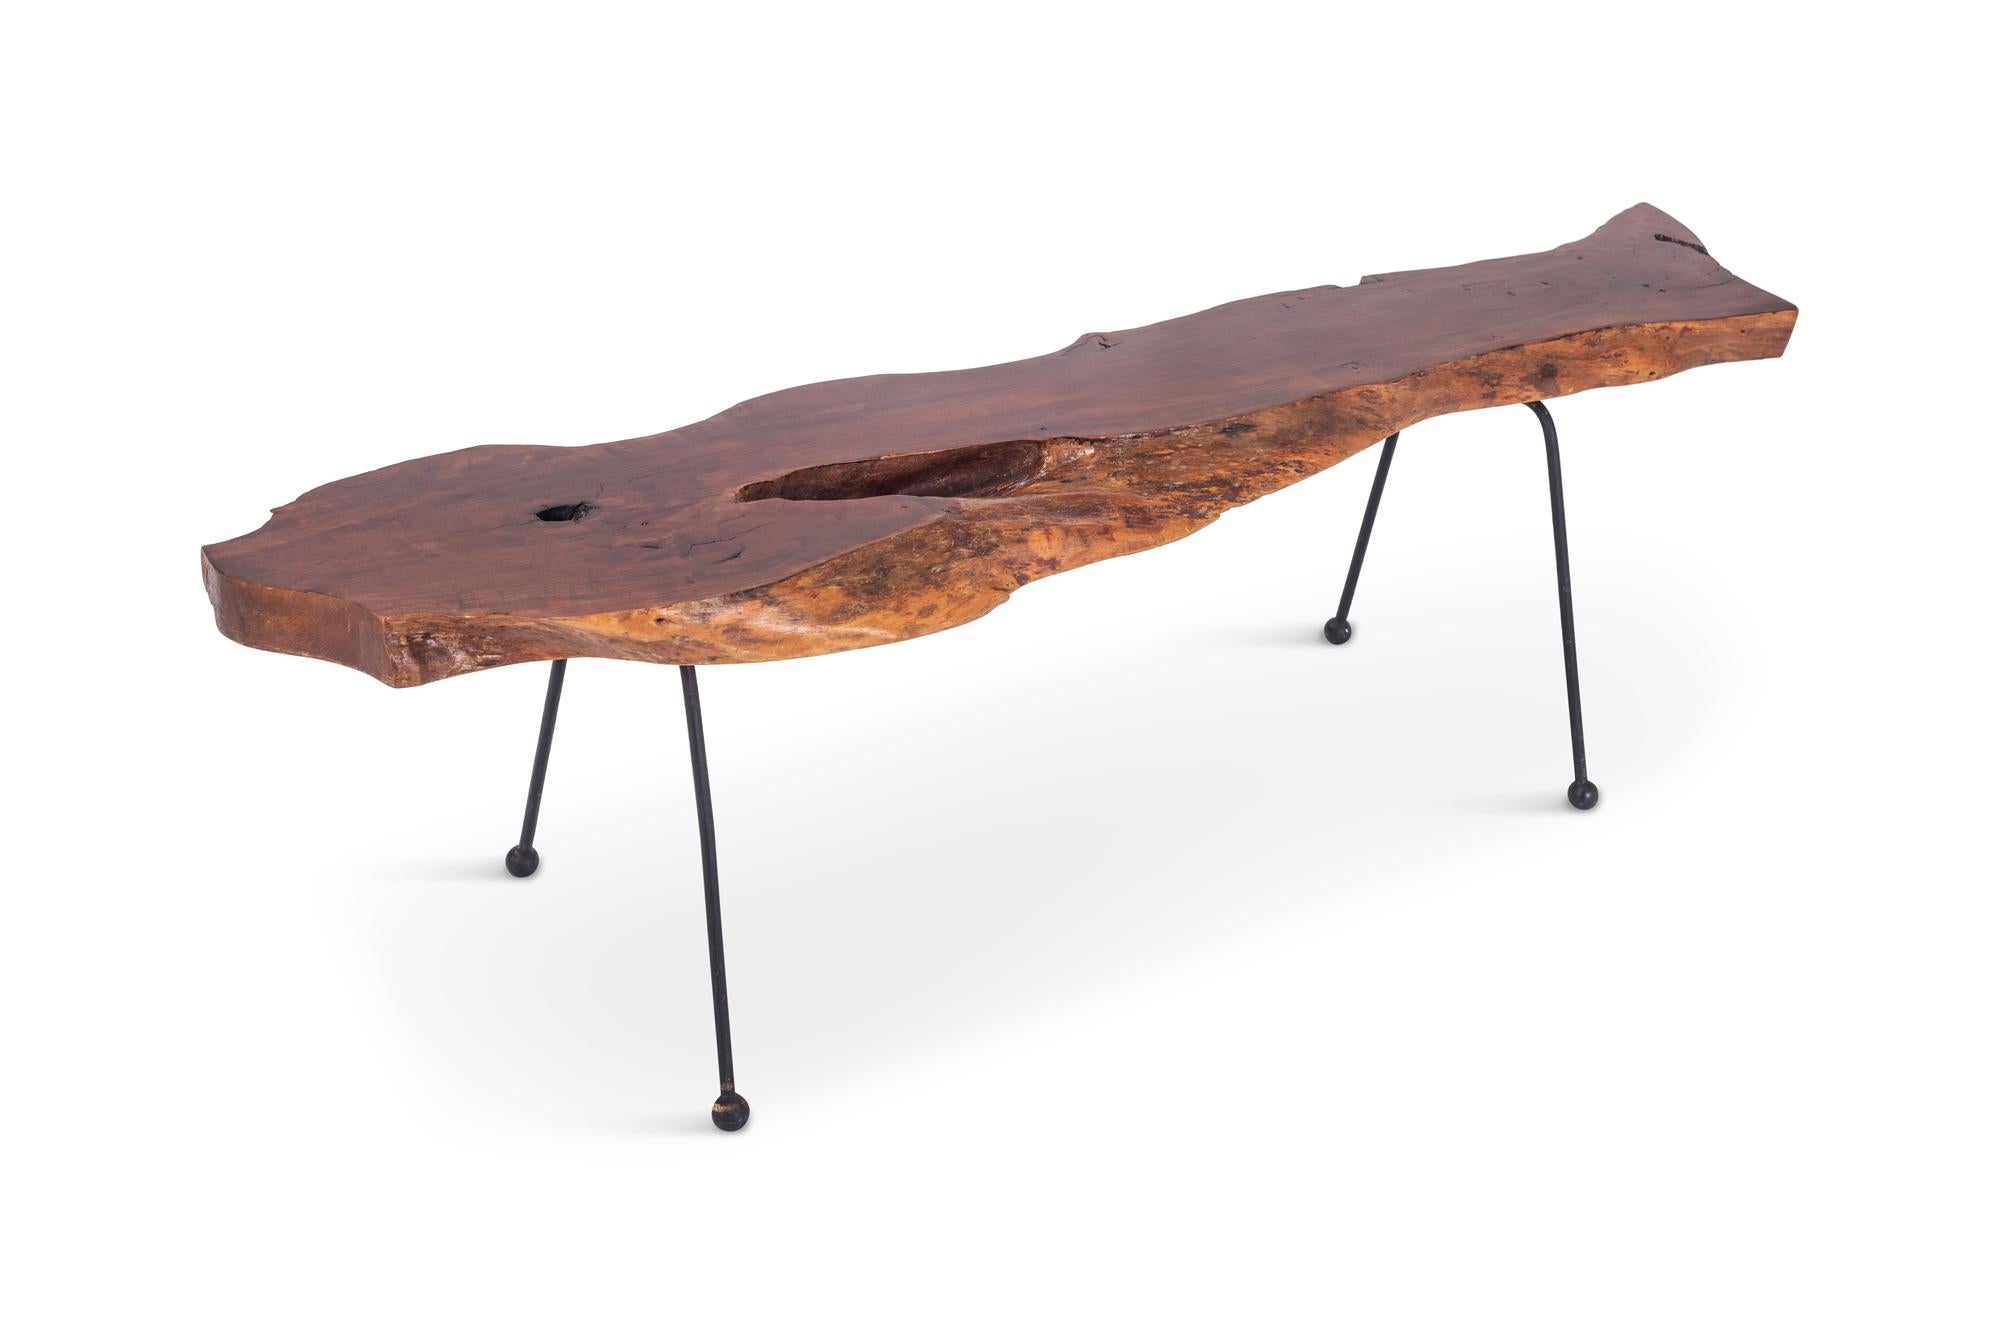 Walnut coffee table in “wabi sabi” style with a beautiful natural shaped tabletop, showing great curves and markings, giving this unique table a wonderful natural expression. 

The tabletop is mounted on four thin black lacquered metal legs with